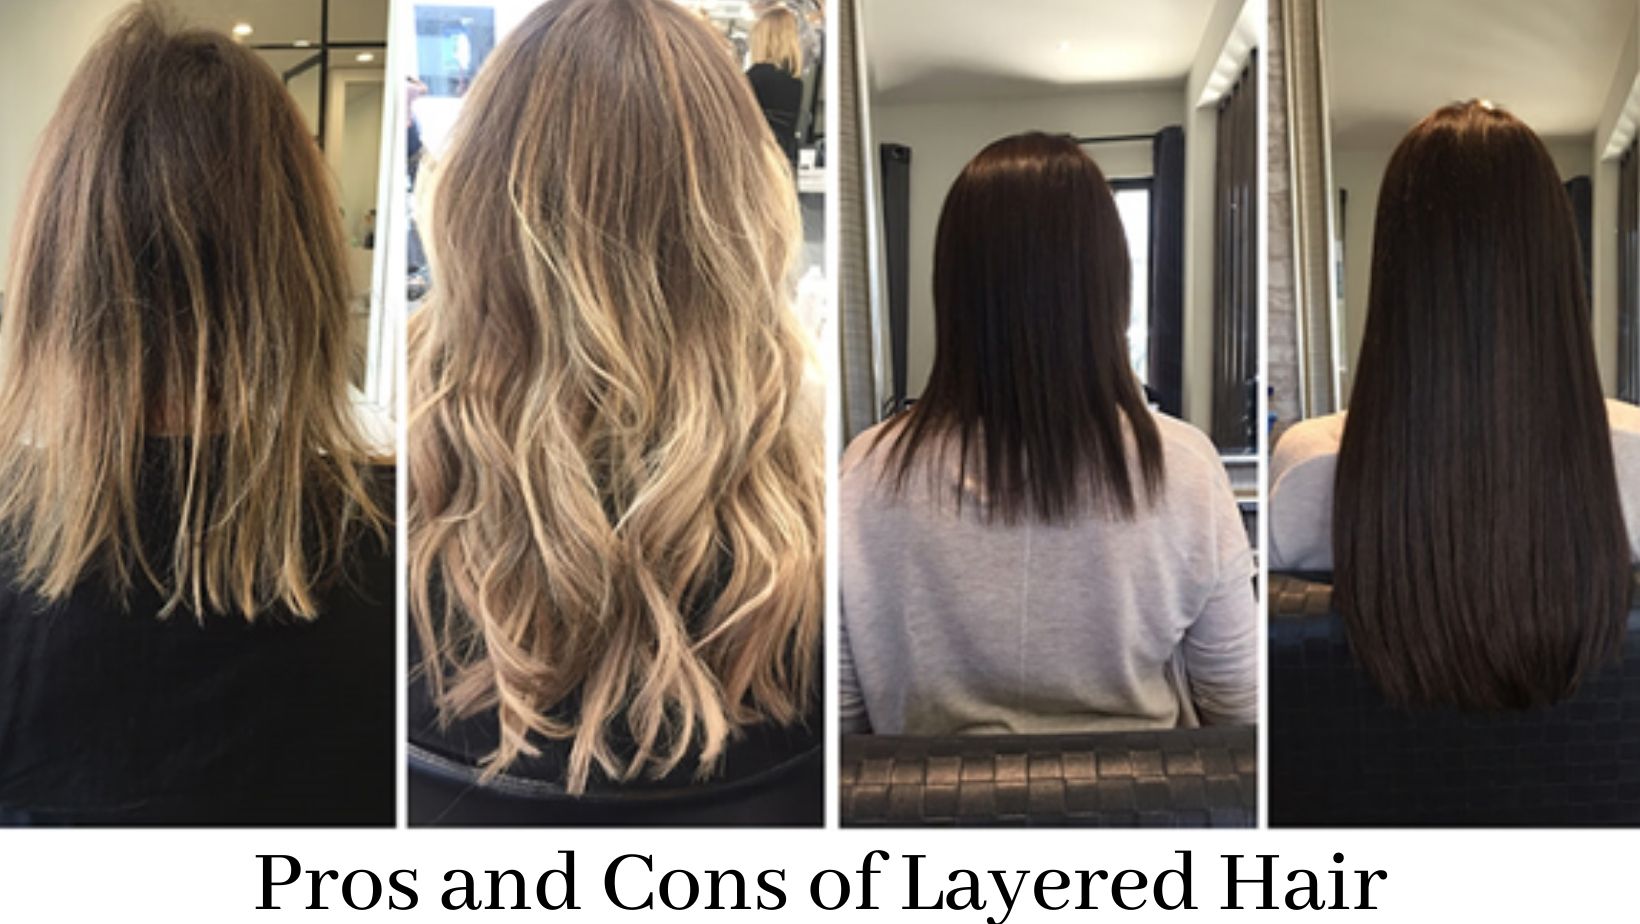 6 Pros And Cons That No One Will Tell You About Layered Hair